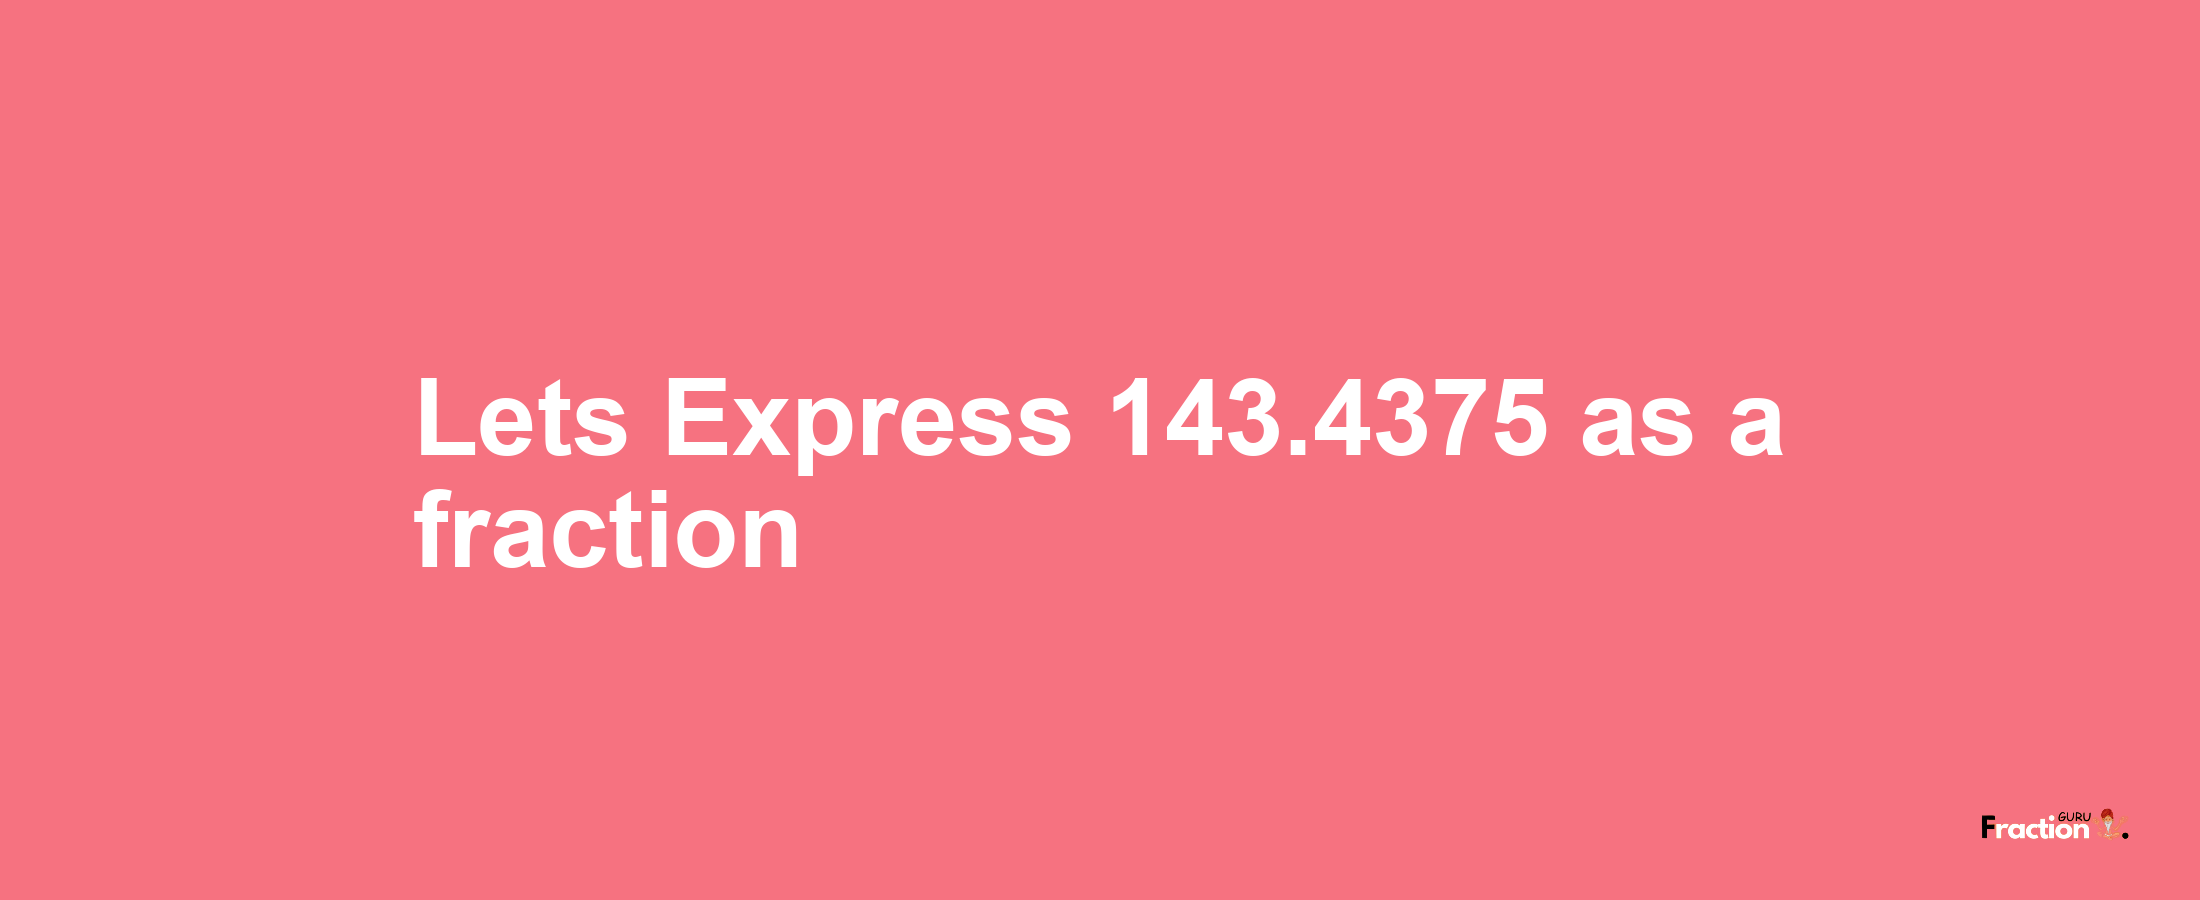 Lets Express 143.4375 as afraction